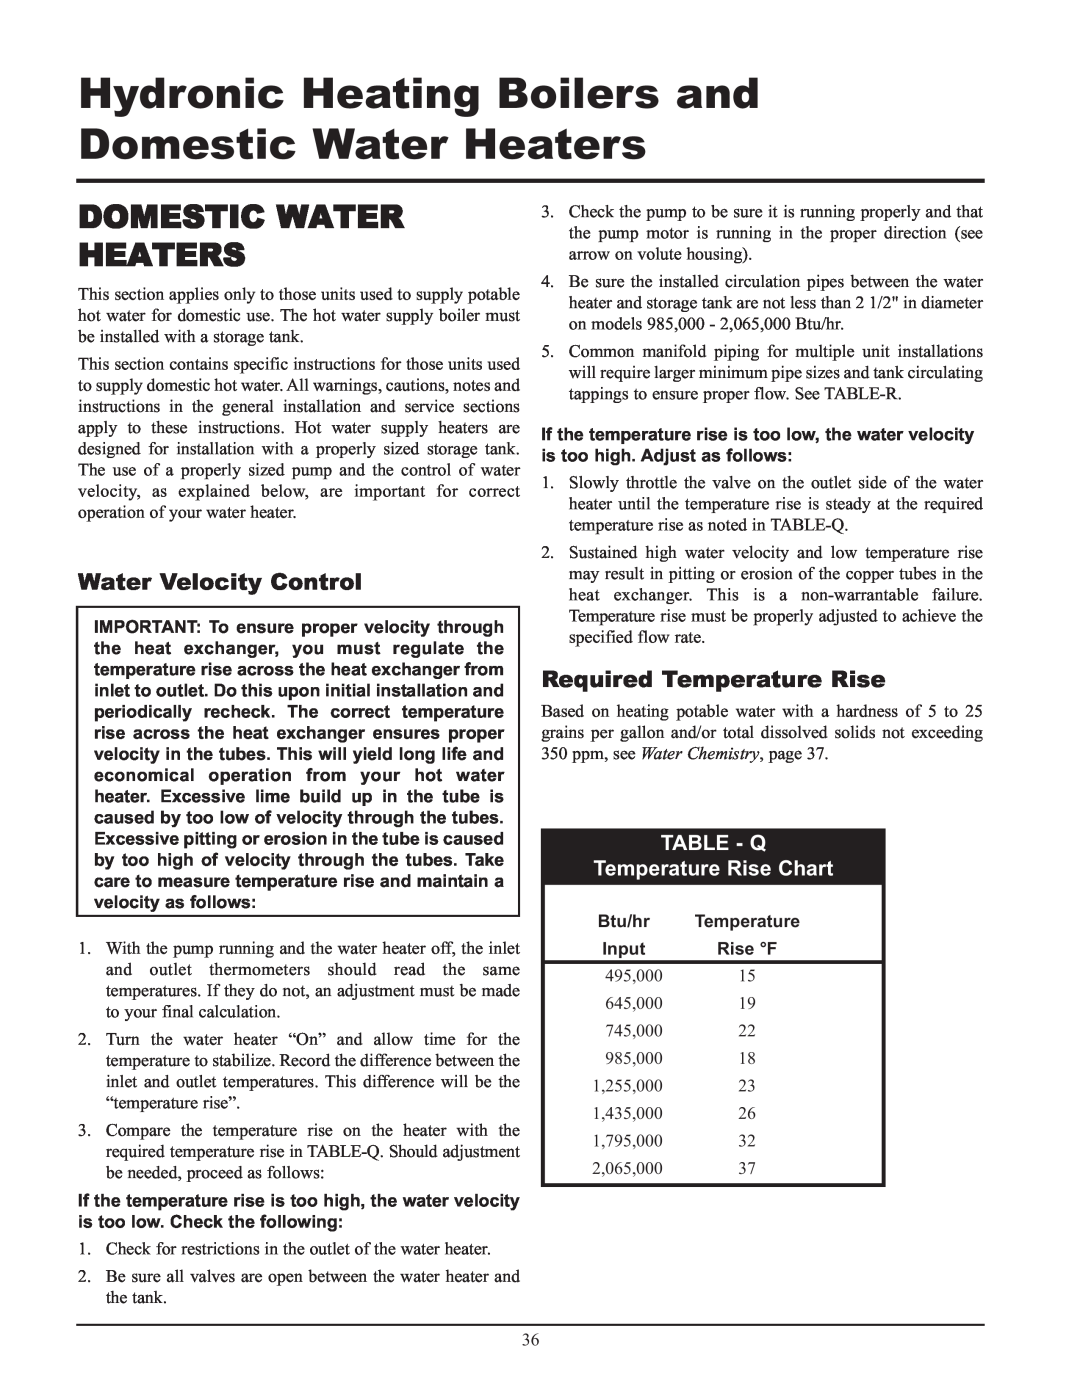 Lochinvar 495 Domestic Water Heaters, Water Velocity Control, Required Temperature Rise, TABLE - Q Temperature Rise Chart 